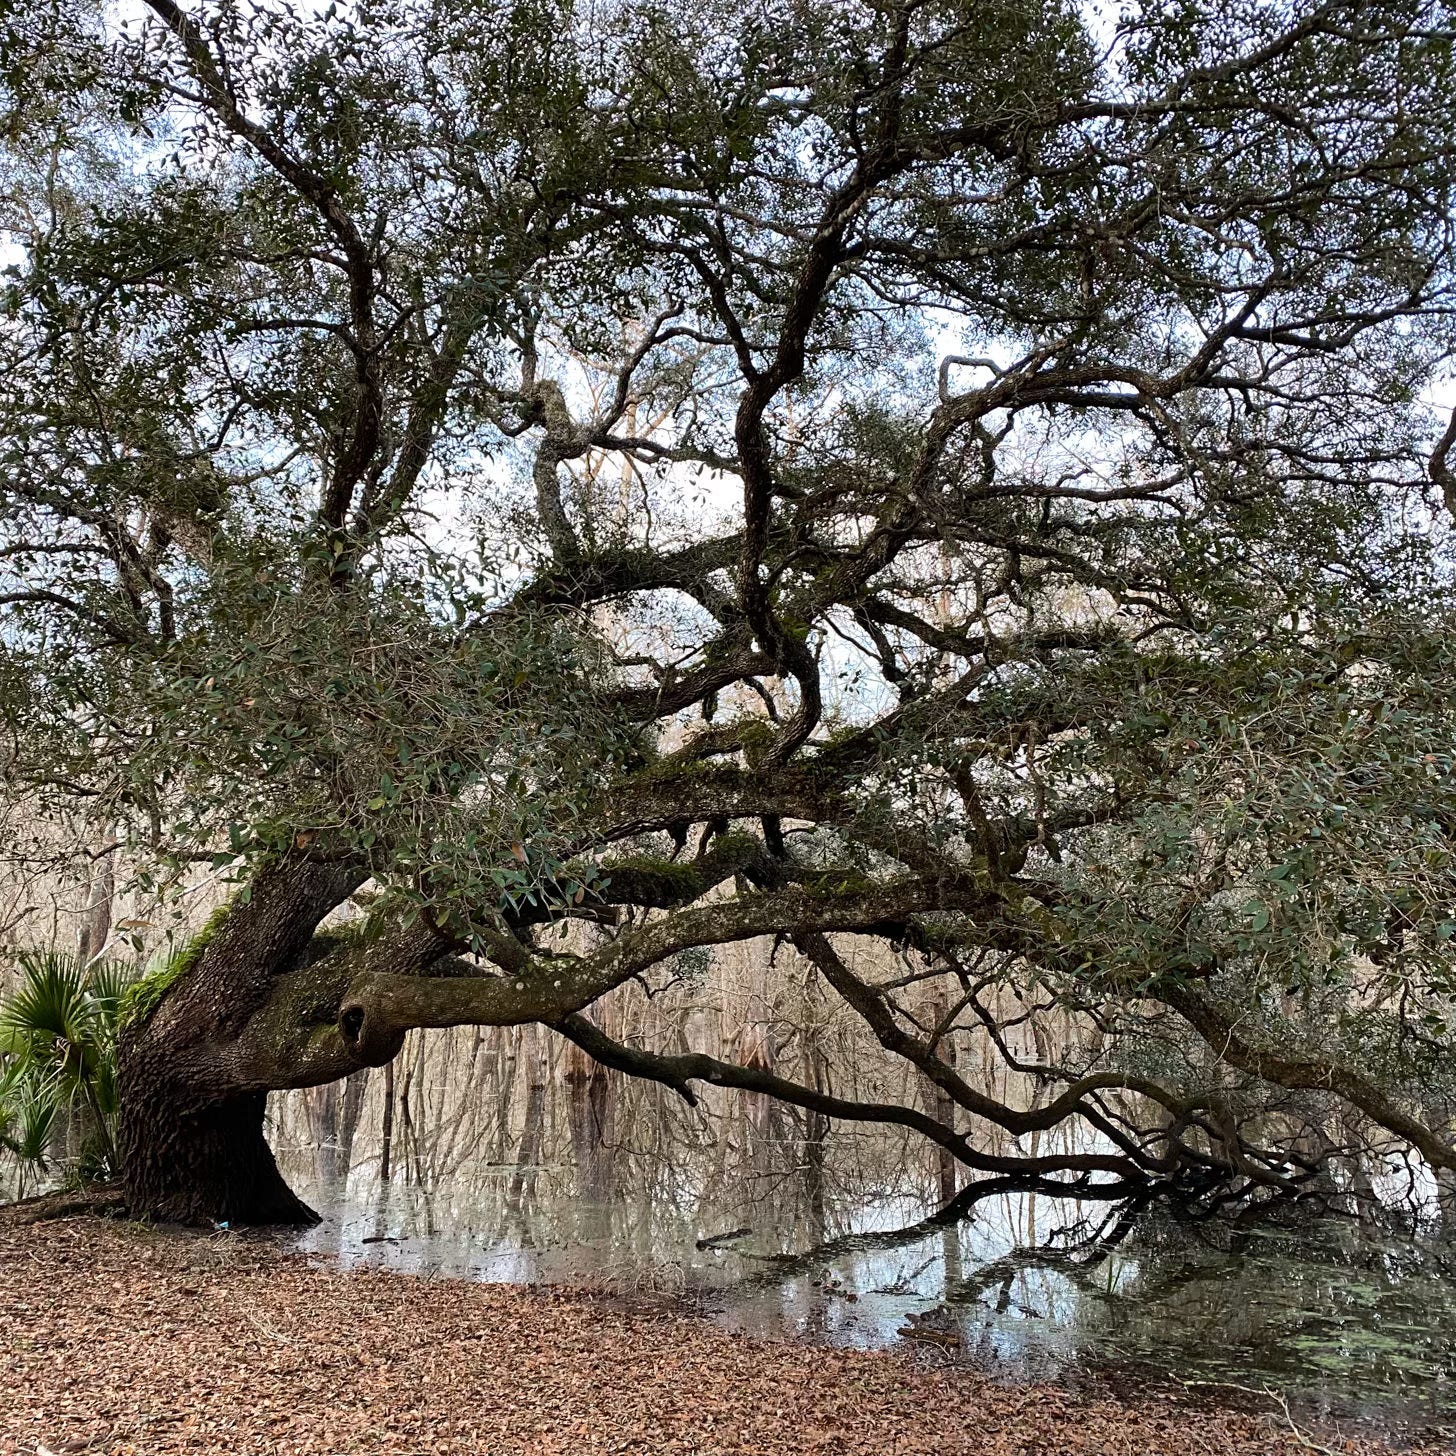 Florida Live Oak, growing at edge of a river